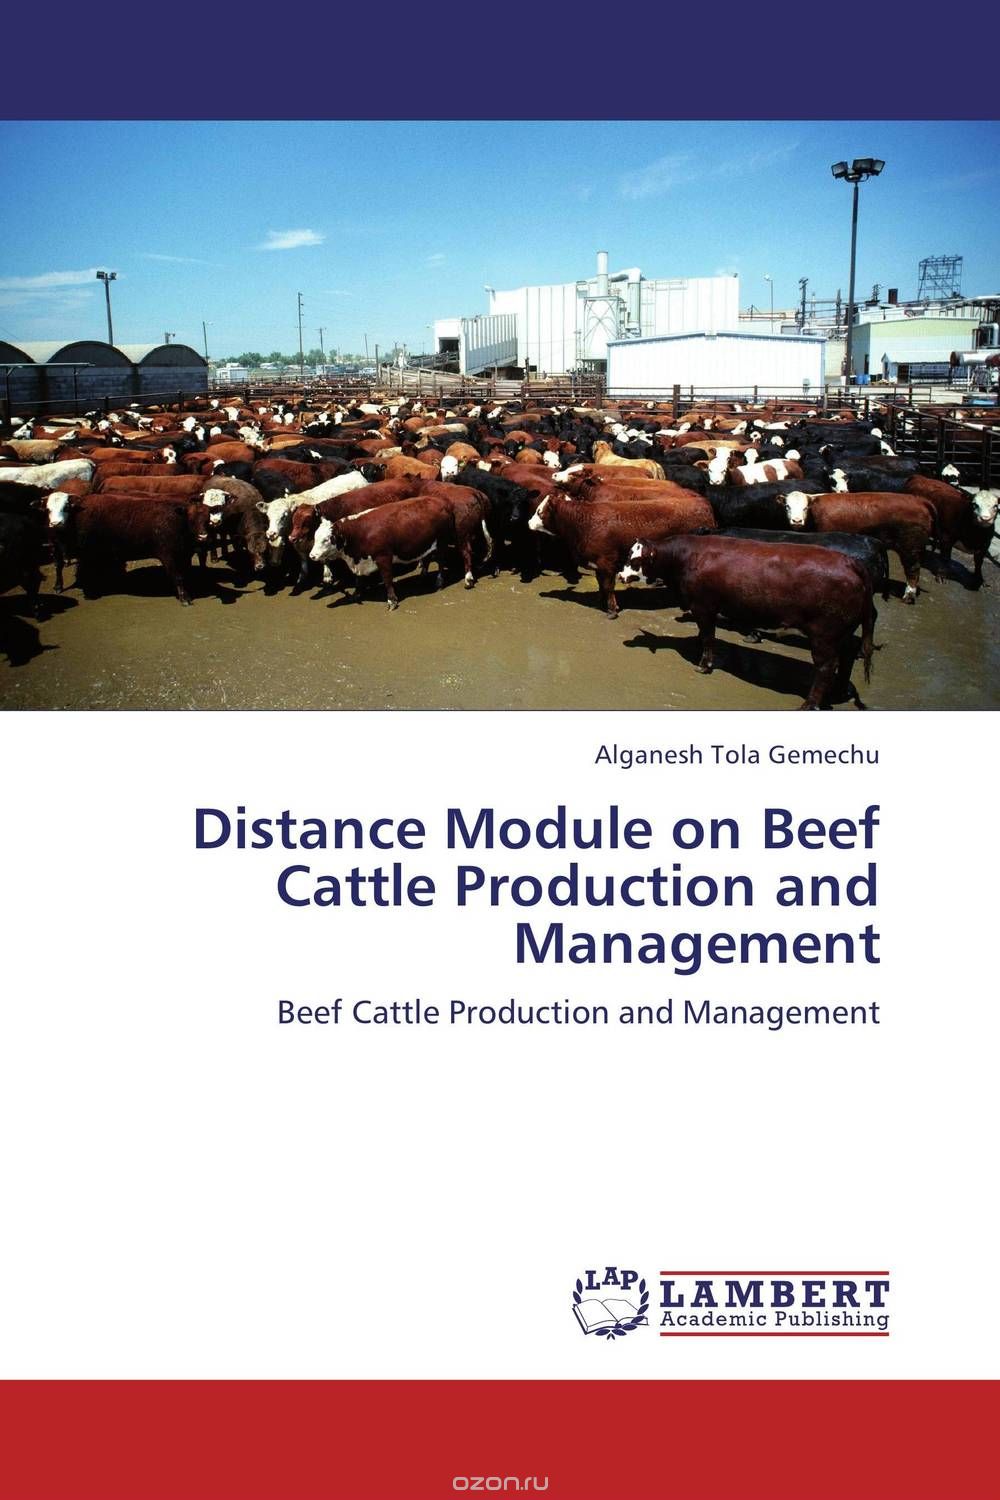 Скачать книгу "Distance Module on Beef Cattle Production and Management"